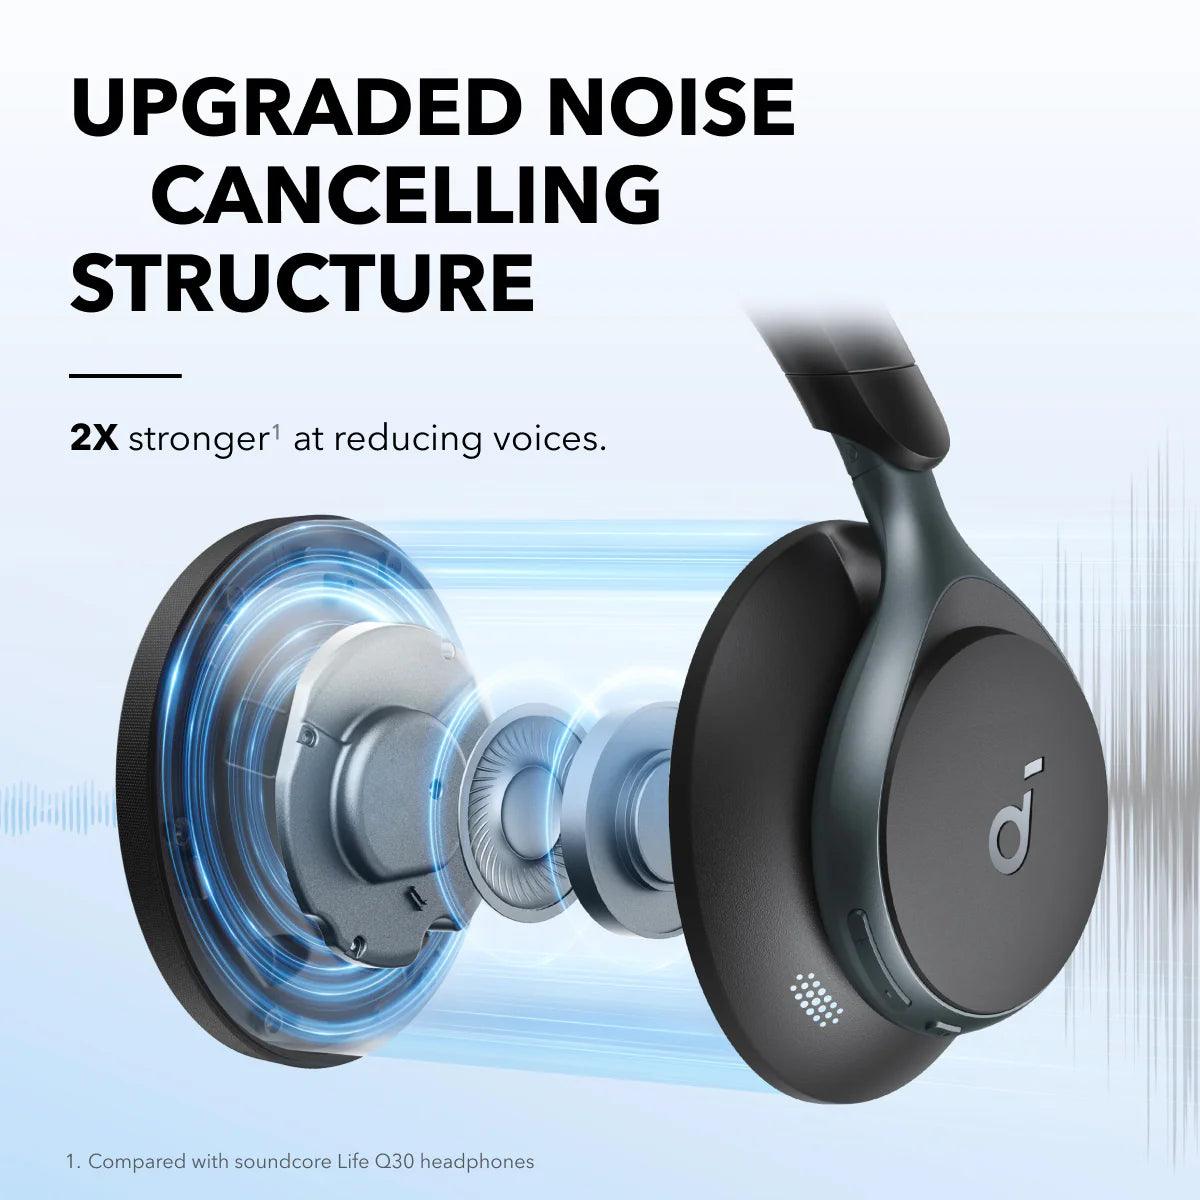 Anker Soundcore Space One